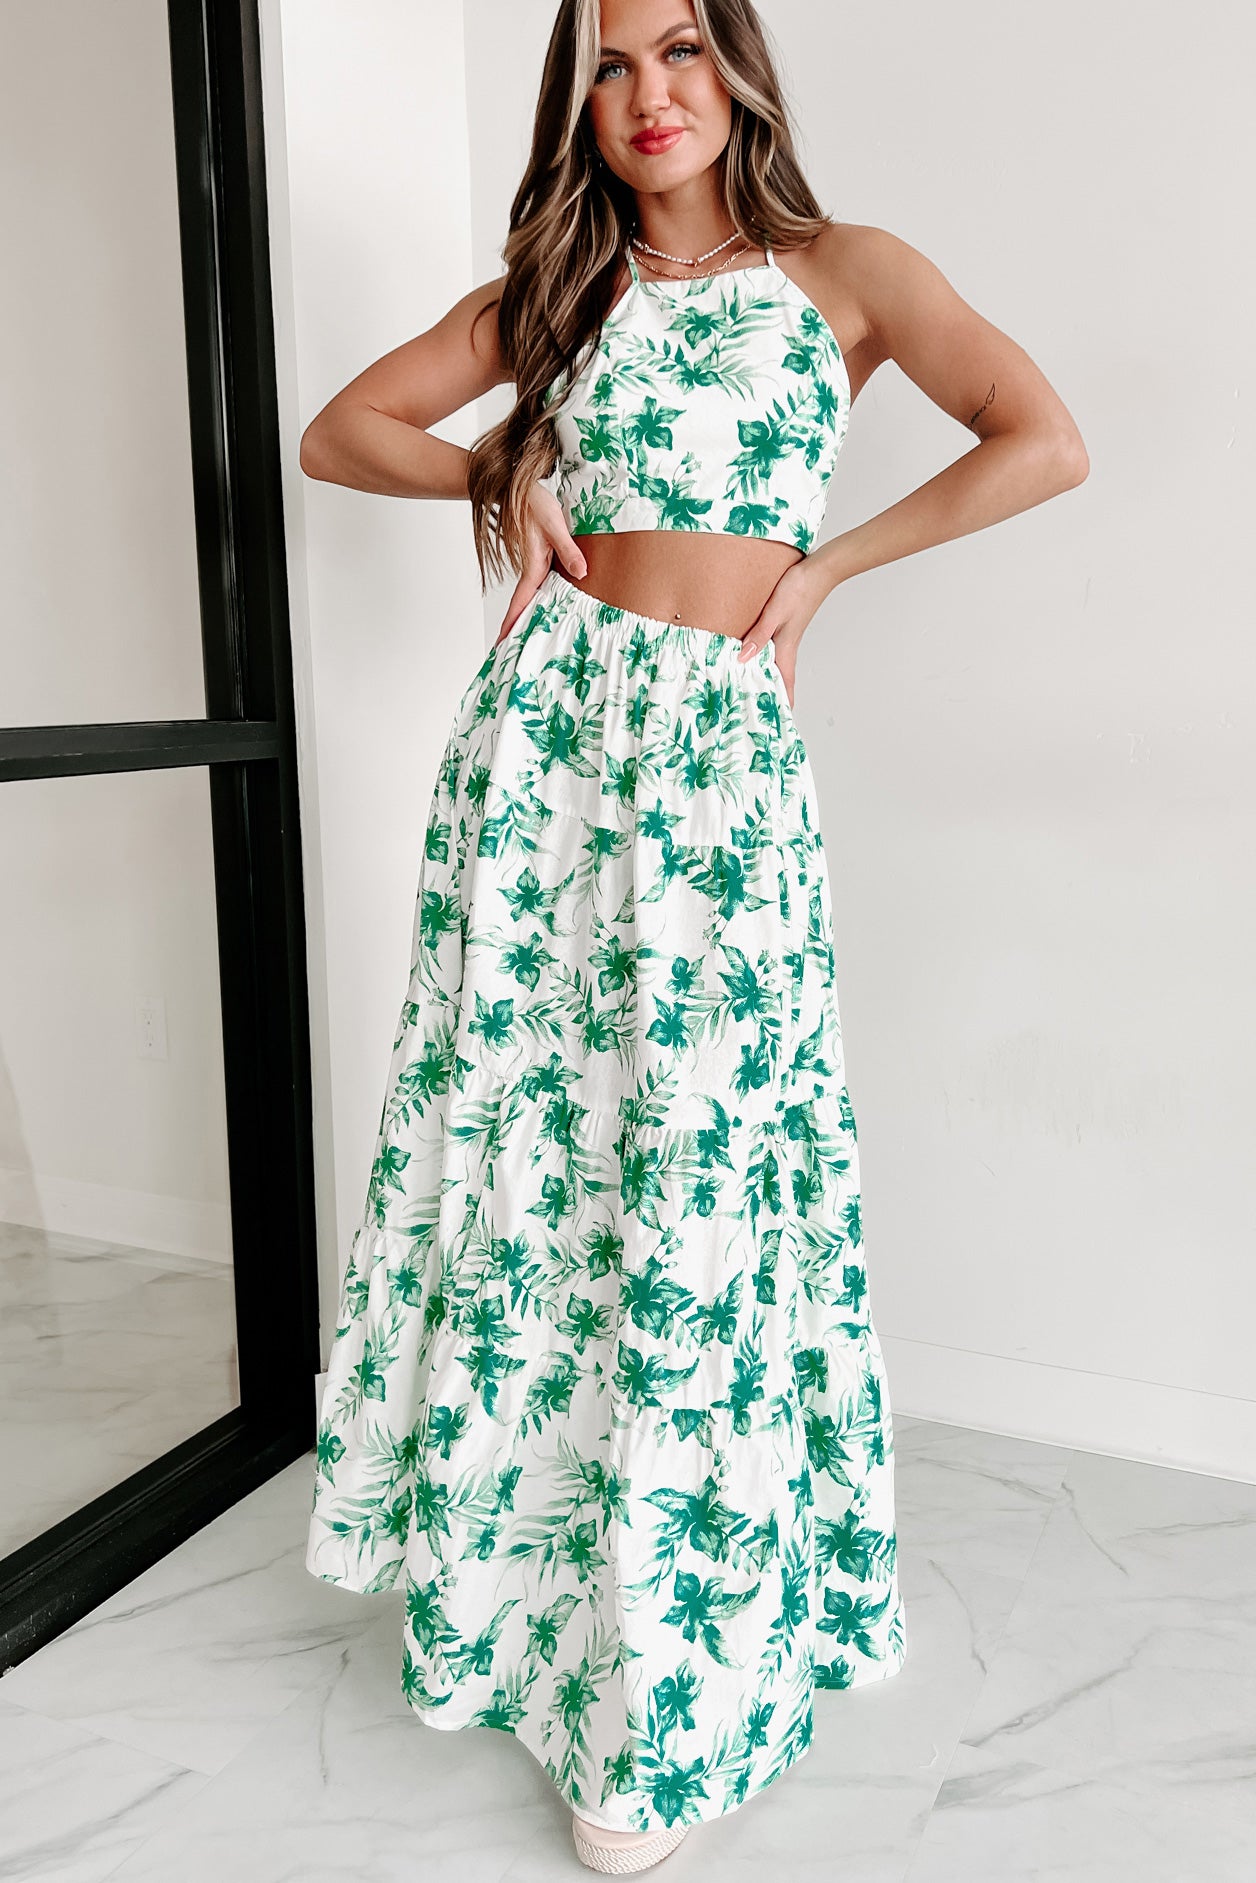 These crop top + maxi skirt pairings prove that opposites attract in  fashion too | Vogue India